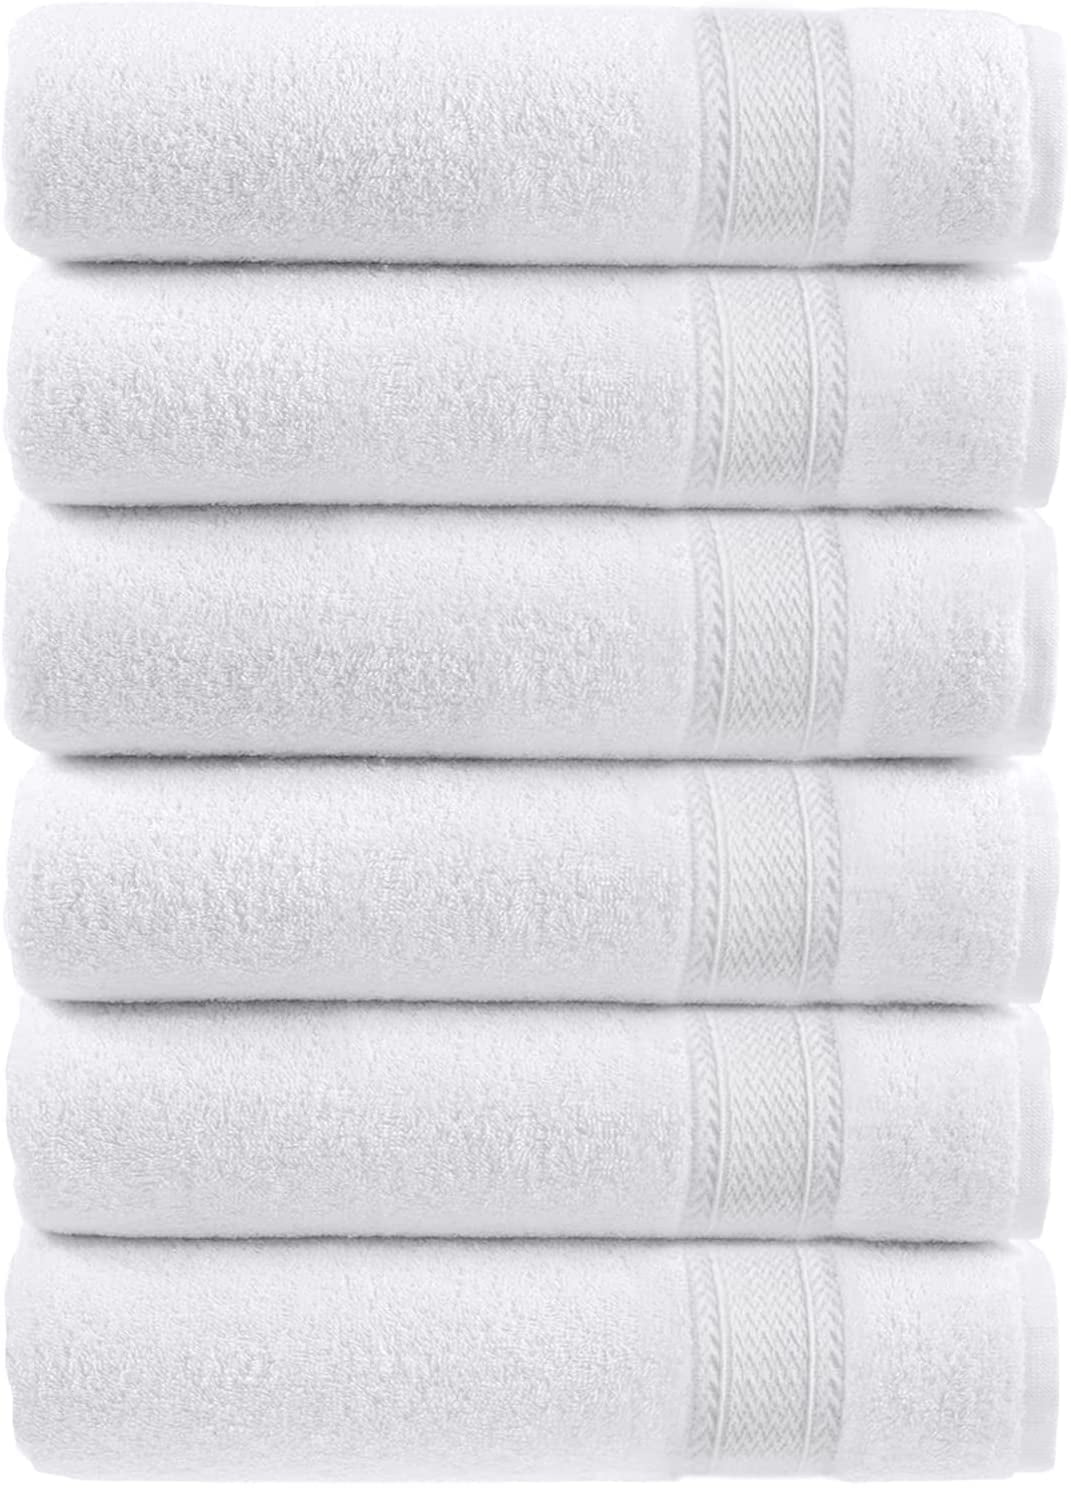 48 absorbent white 100% cotton hotel hand towels 16x27 soft spa salon grade 